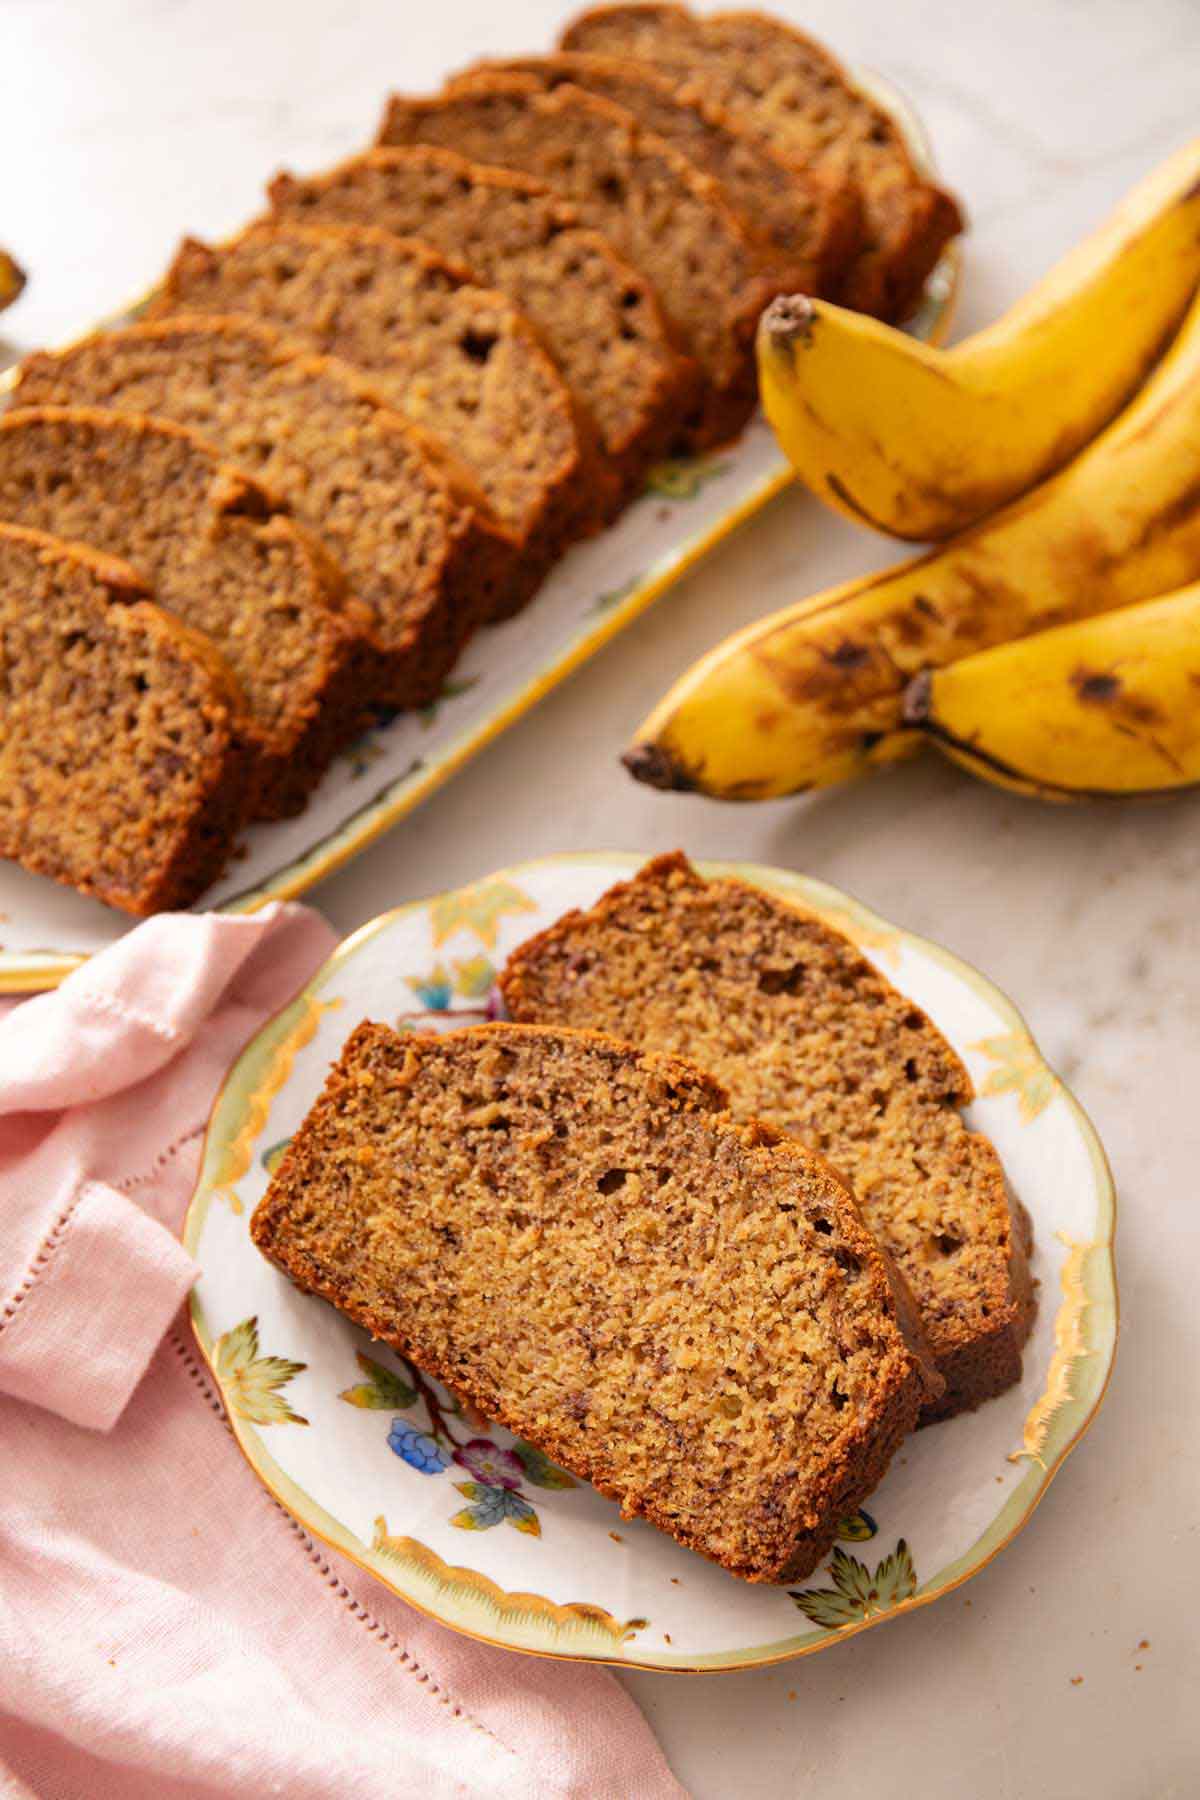 A plate with two slices of banana bread with a platter in the background with the rest of the sliced loaf. Bananas off to the side.